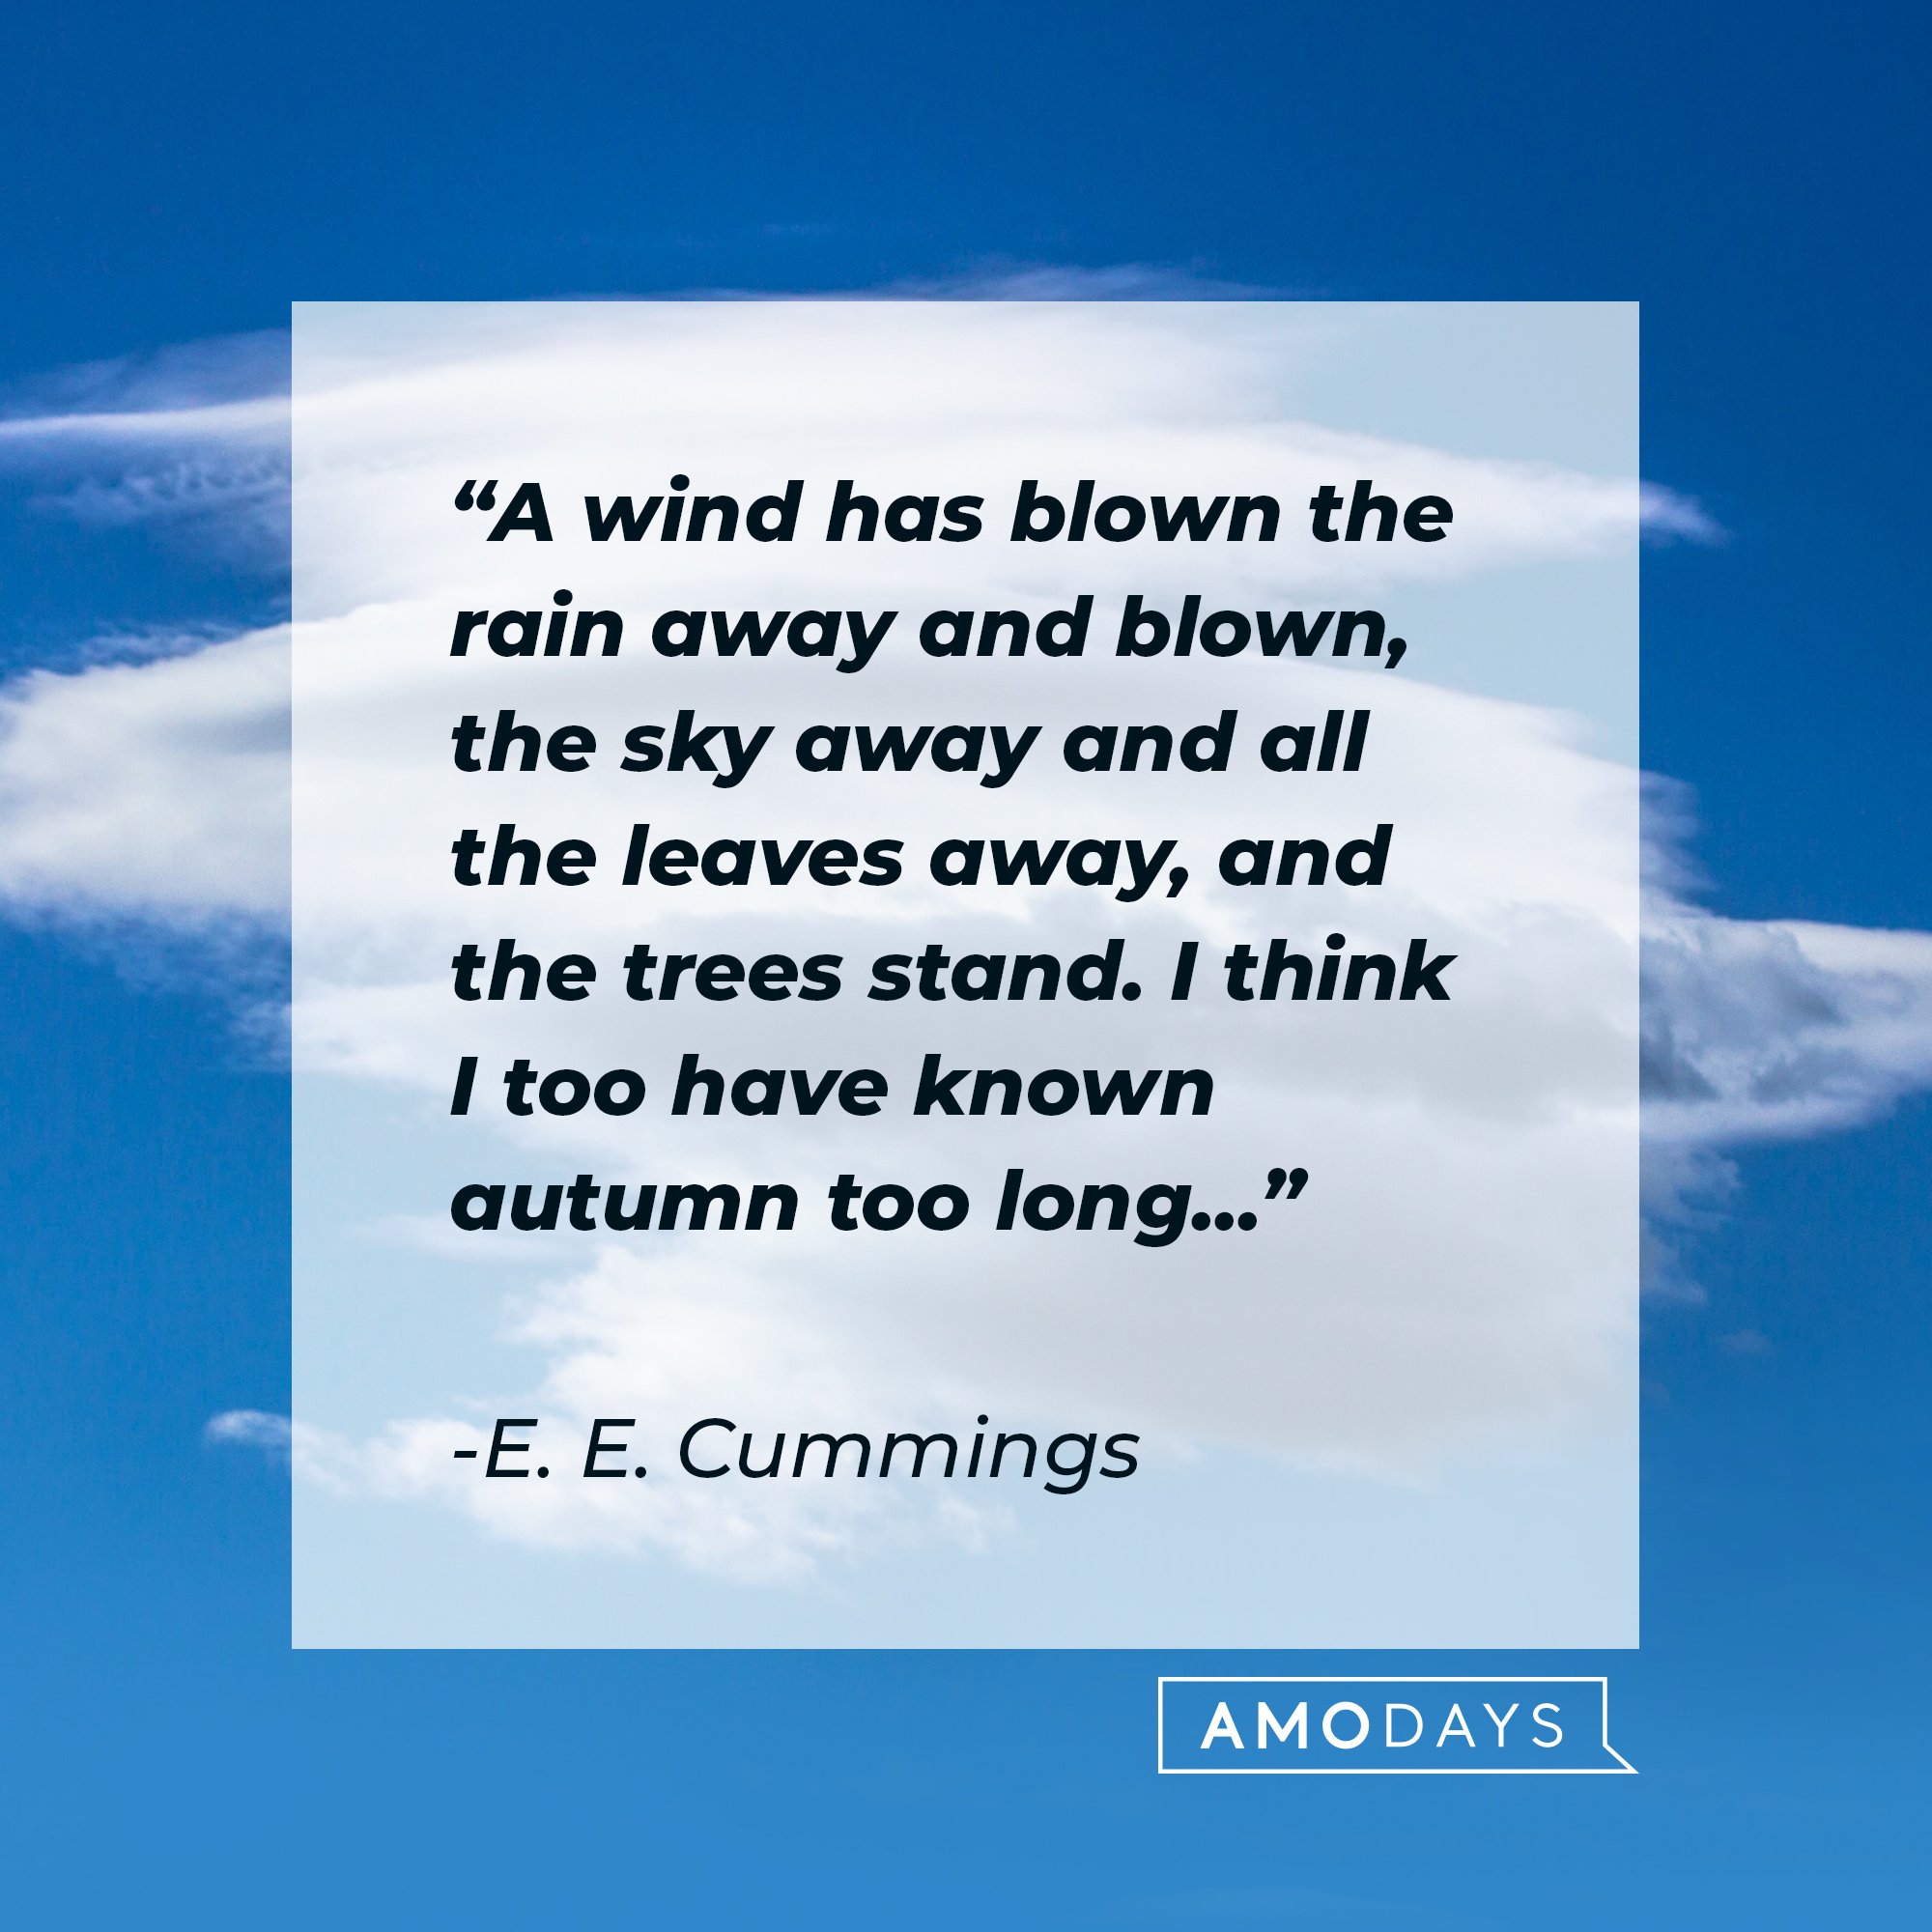 E. E. Cummings' quote: "A wind has blown the rain away and blown, the sky away and all the leaves away, and the trees stand. I think I too have known autumn too long..." | Image: AmoDays